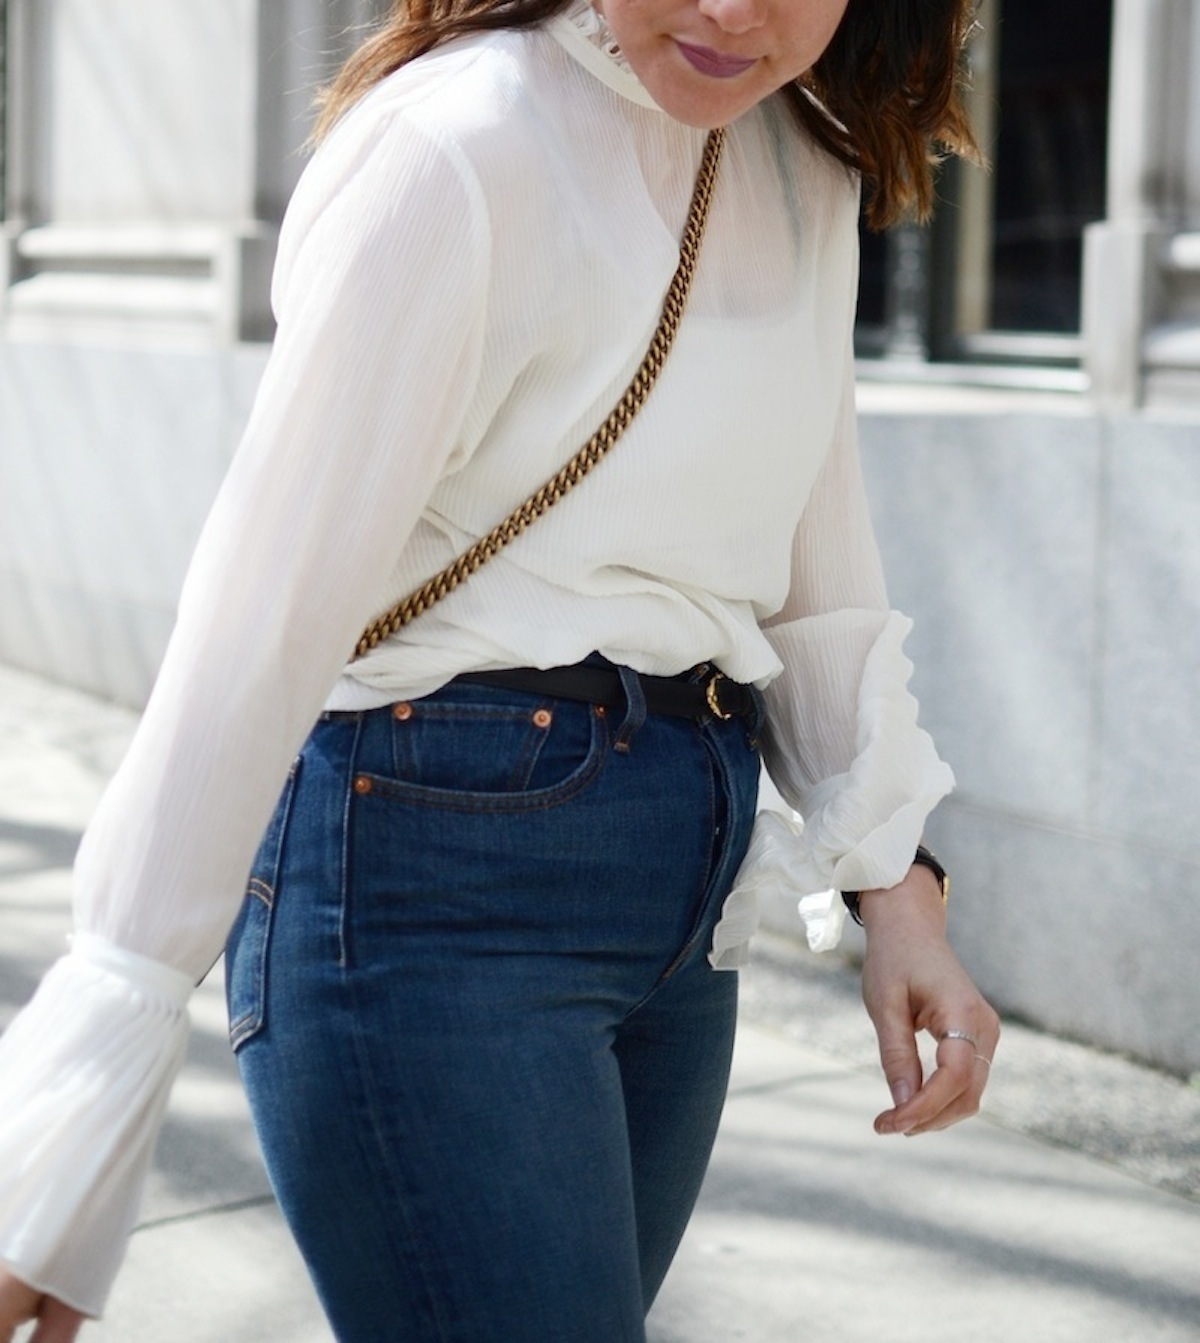 HM flared sleeve blouse outfit levis wedgie jeans gucci marmont bag vancouver fashion blogger 5